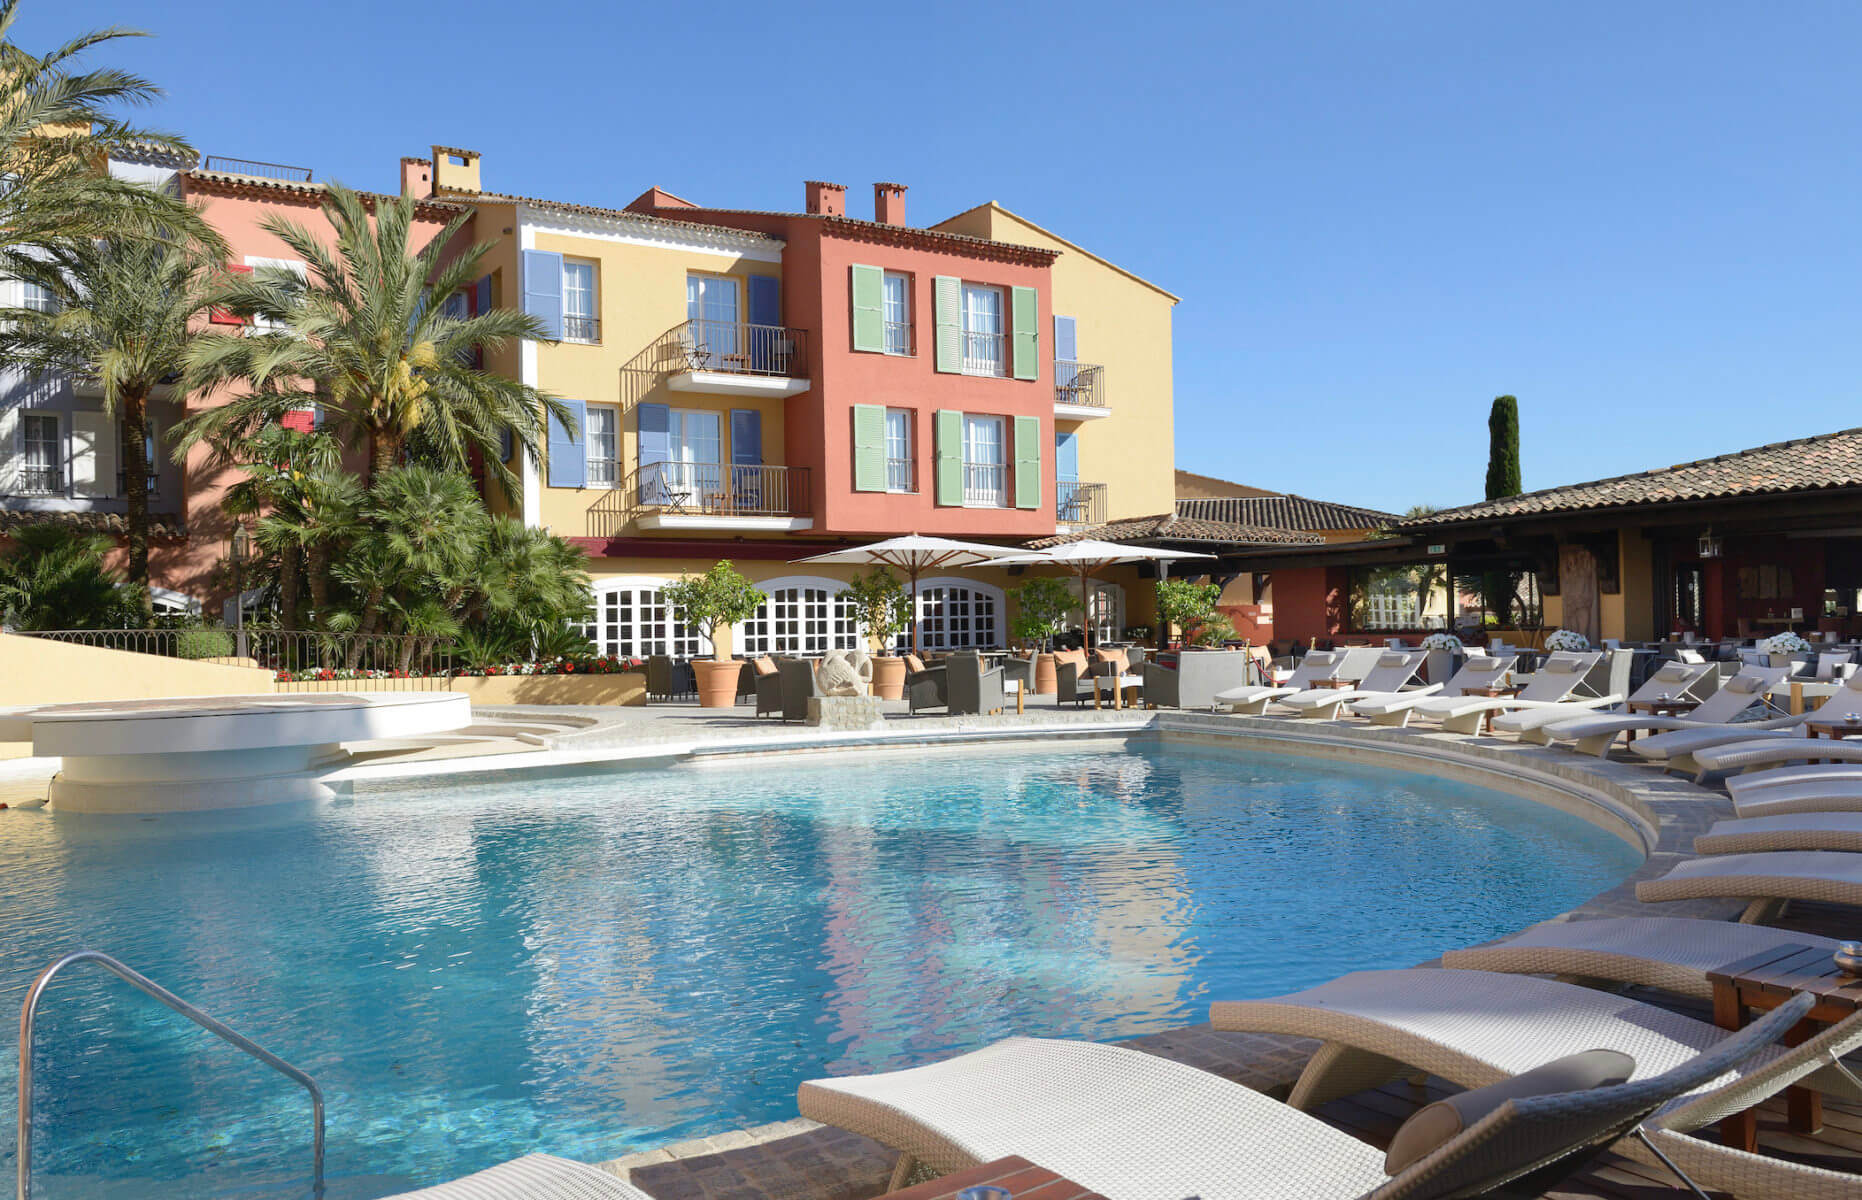 The Byblos Palace hotel  - a luxury location in Saint-Tropez